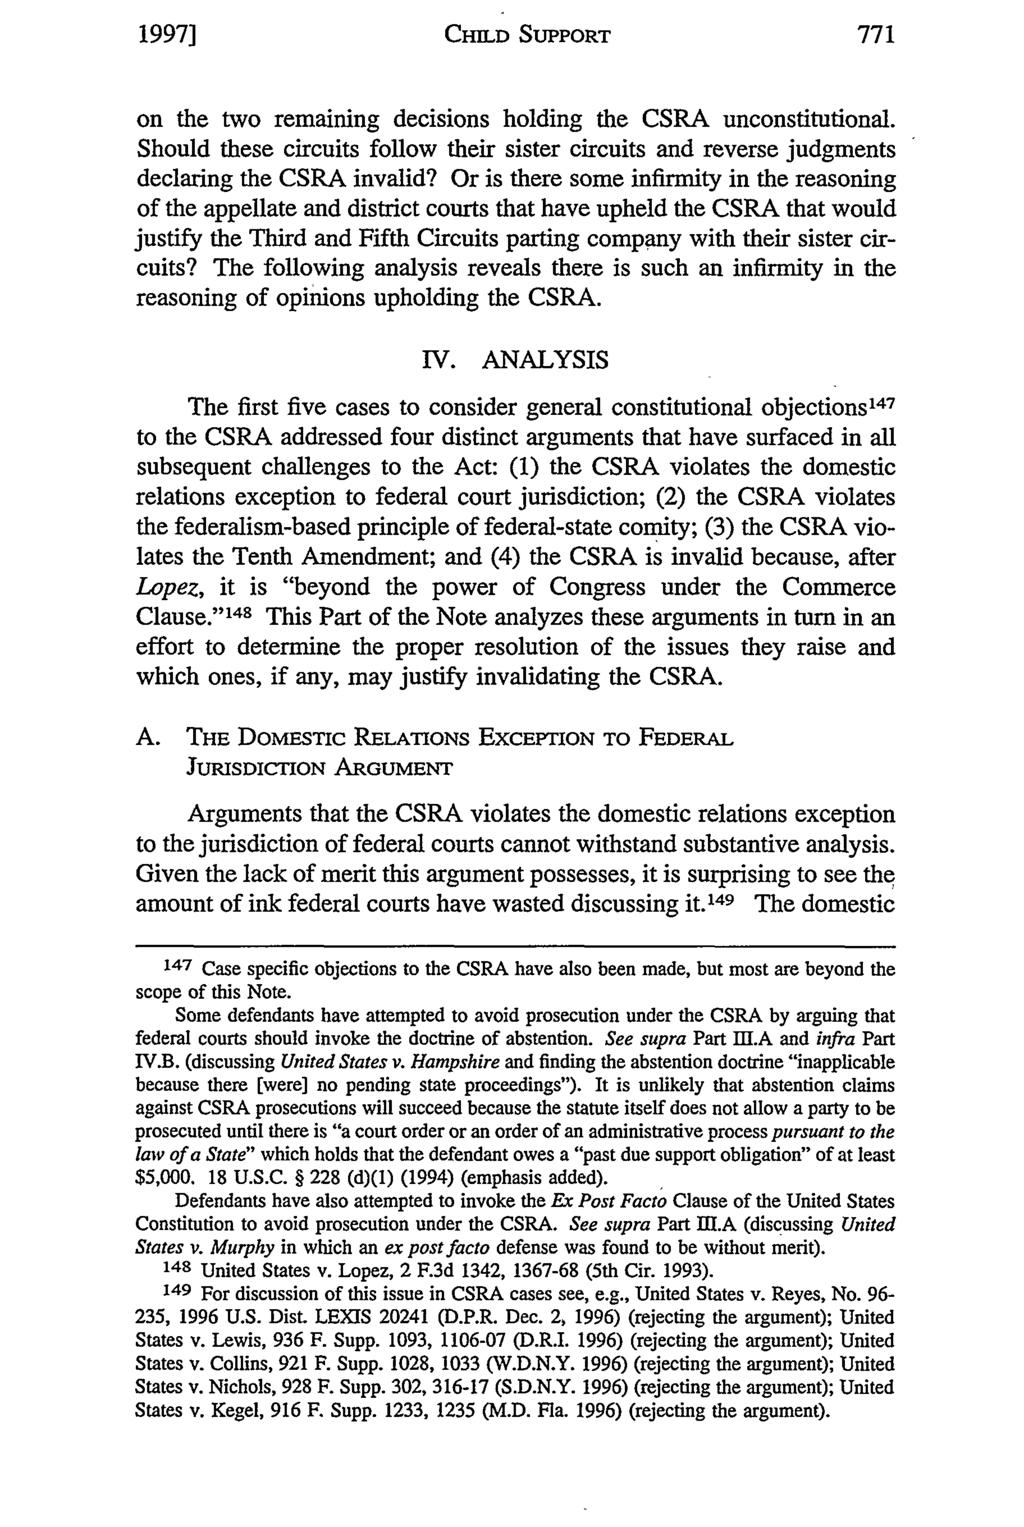 1997] CHILD SUPPORT on the two remaining decisions holding the CSRA unconstitutional. Should these circuits follow their sister circuits and reverse judgments declaring the CSRA invalid?